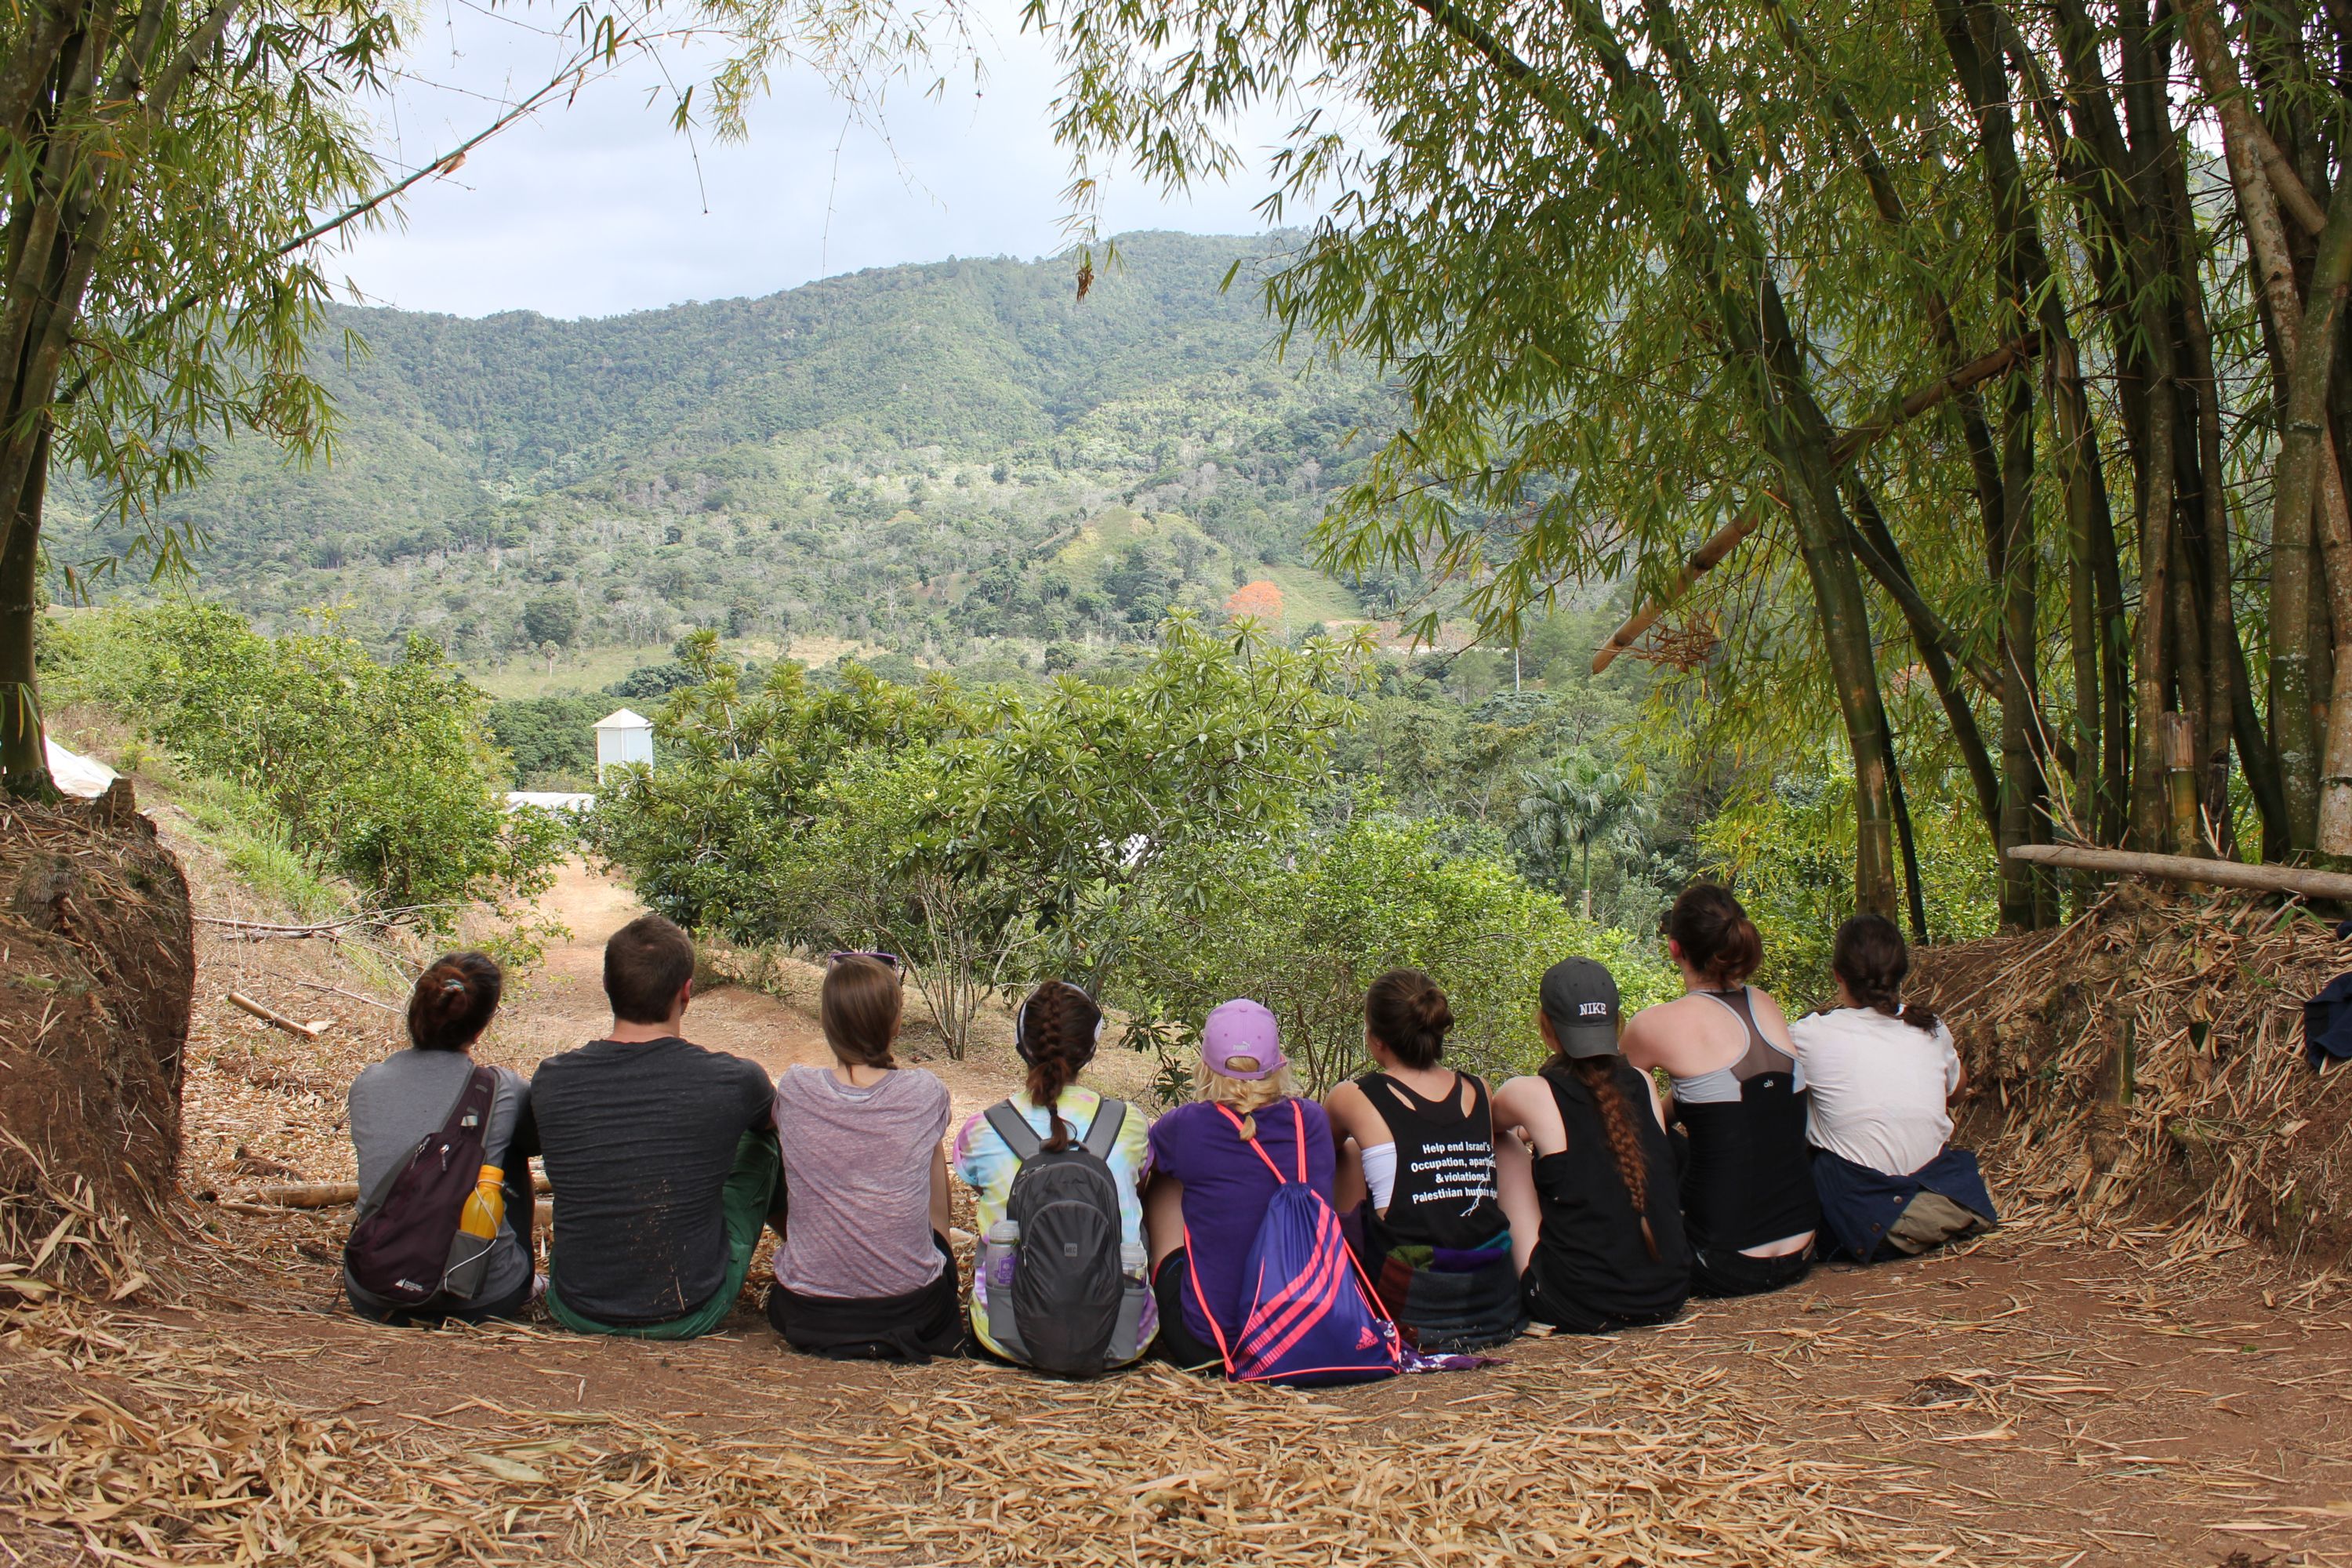 (Image: Students at an organic farm in Dominican Republic)